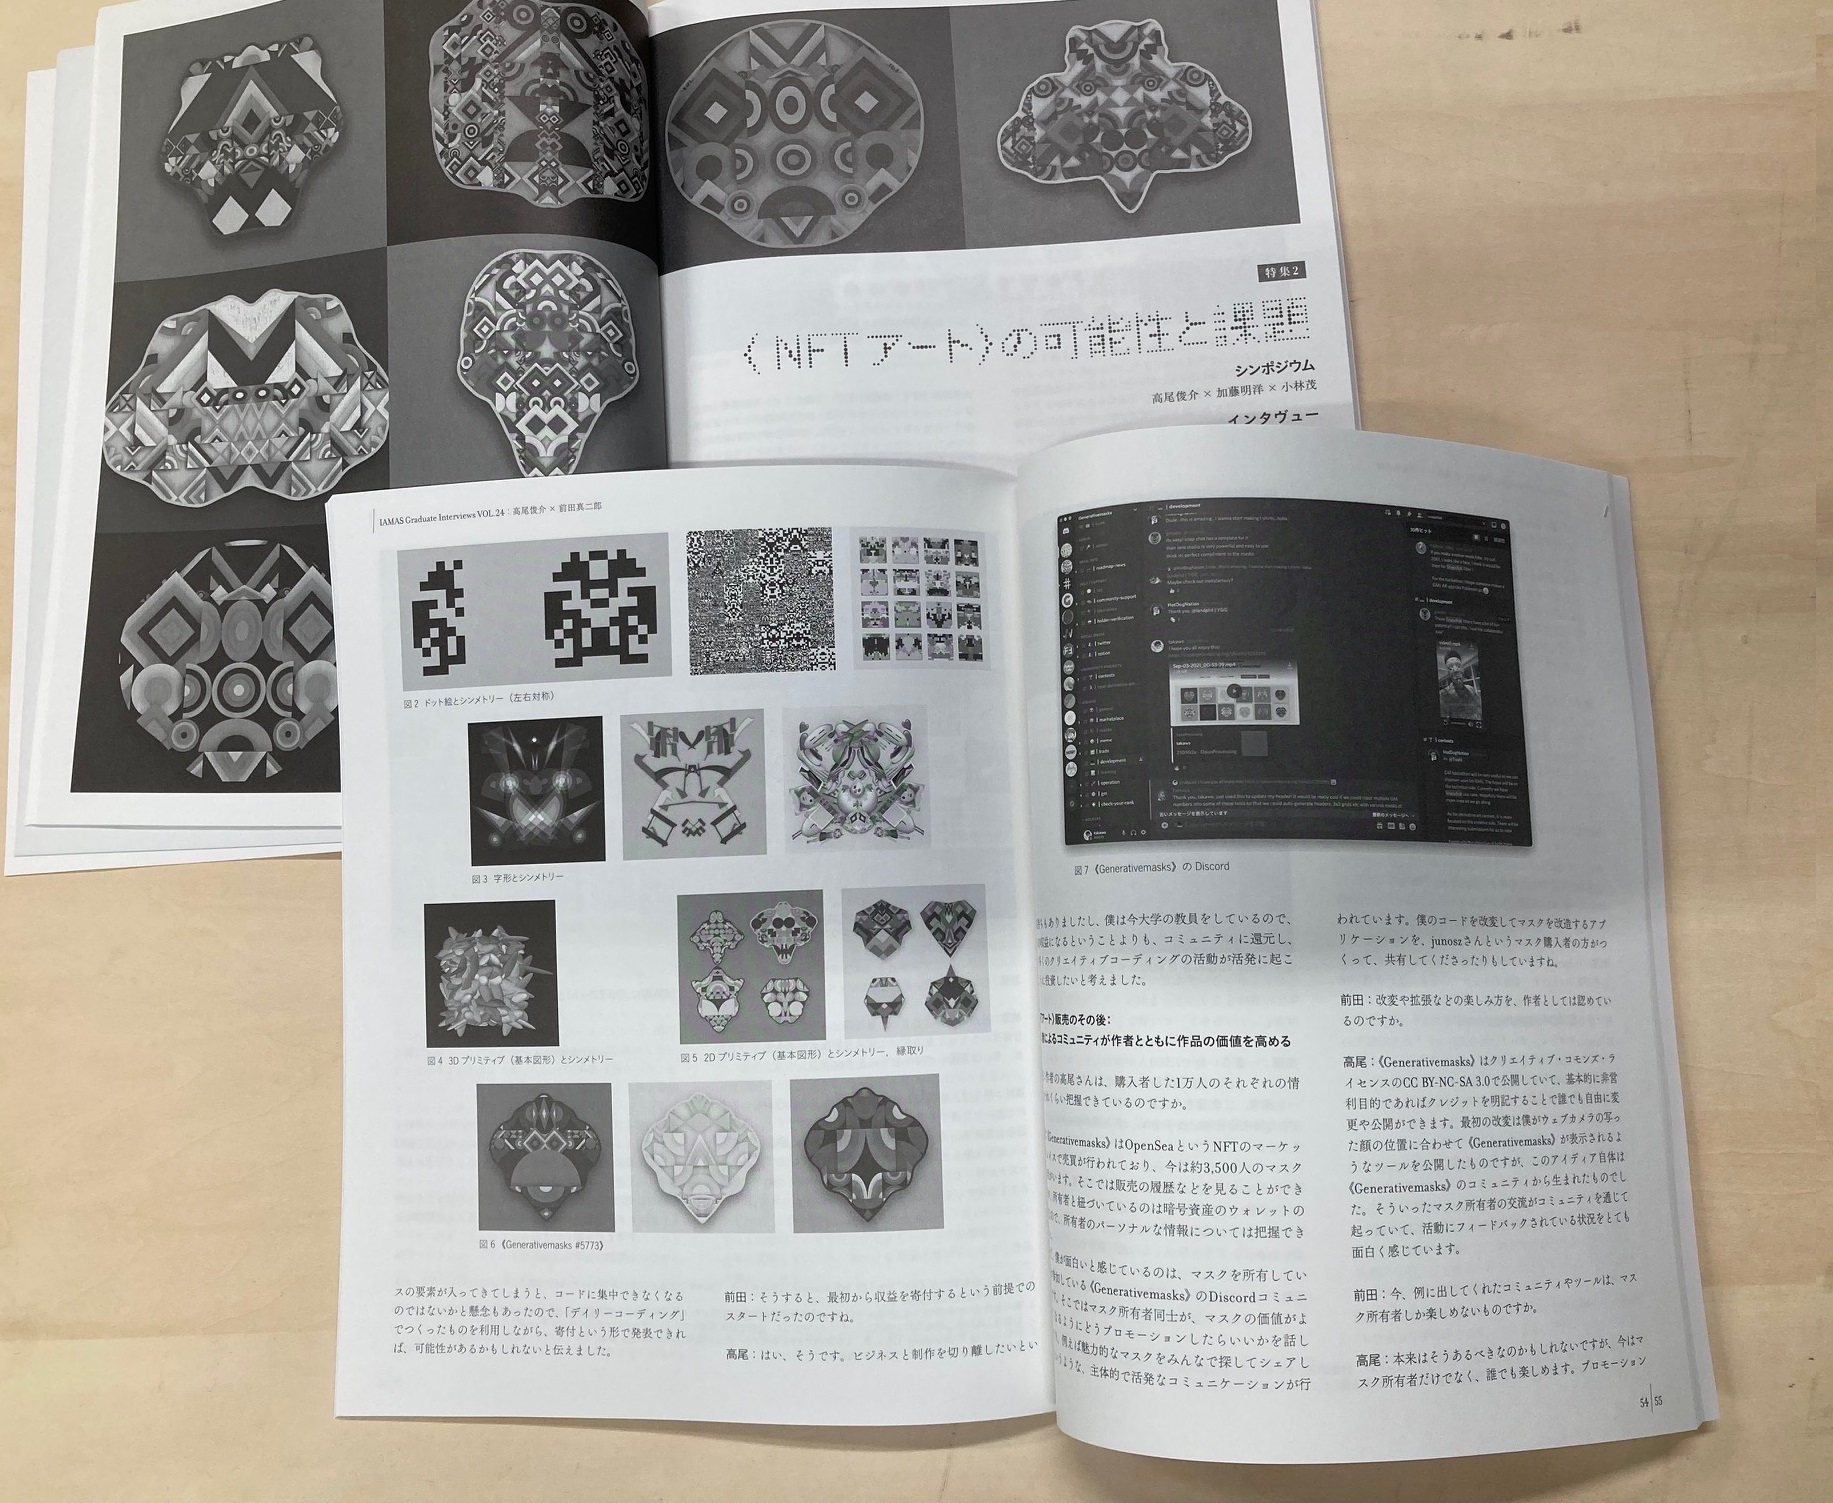 Journal of Institute of Advanced Media Arts and Sciences, Vol. 13イメージ